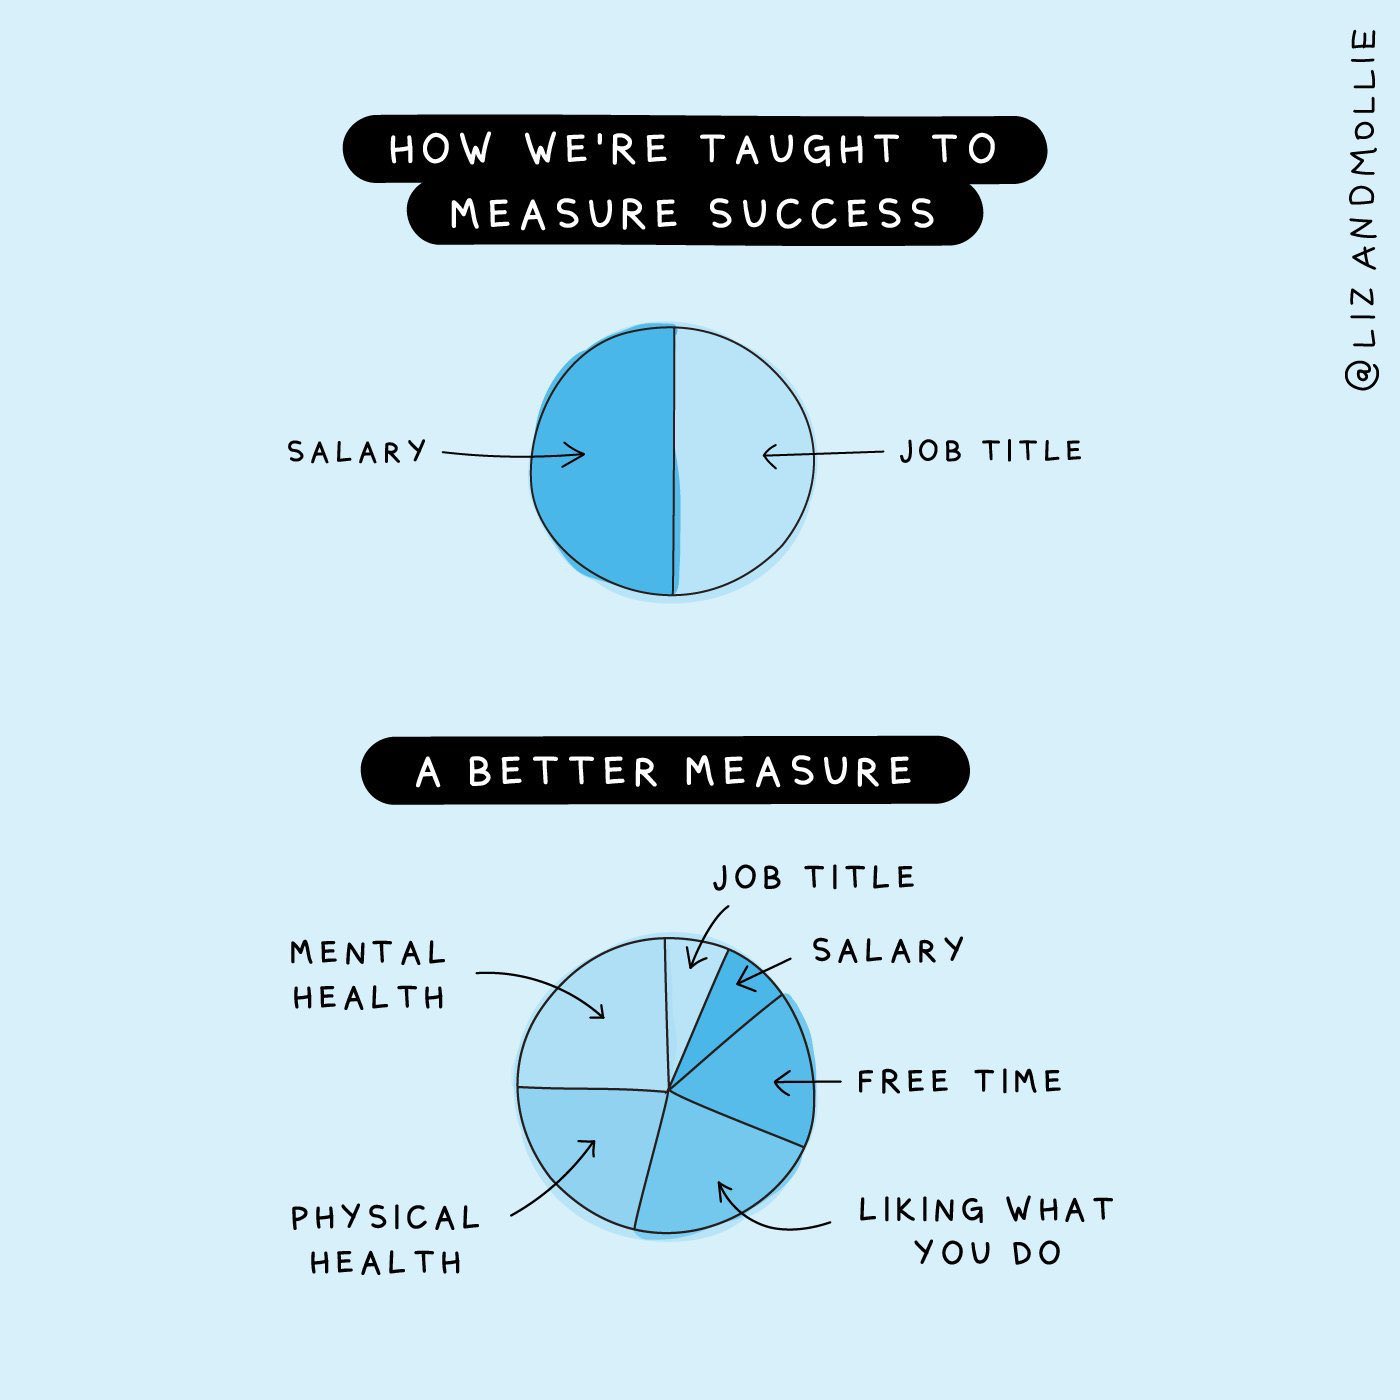 Title 1: How we’re taught to measure success. Image: A pie diagram showing two equal parts, Salary and Job Title.

Title 2:
A better measure. Image: A pie diagram showing more segments, which in increasing sizes are Job Title, Salary, Free Time, Liking What You Do, Physical Health and Mental Health.

Twitter handle in top right: @lizandmollie